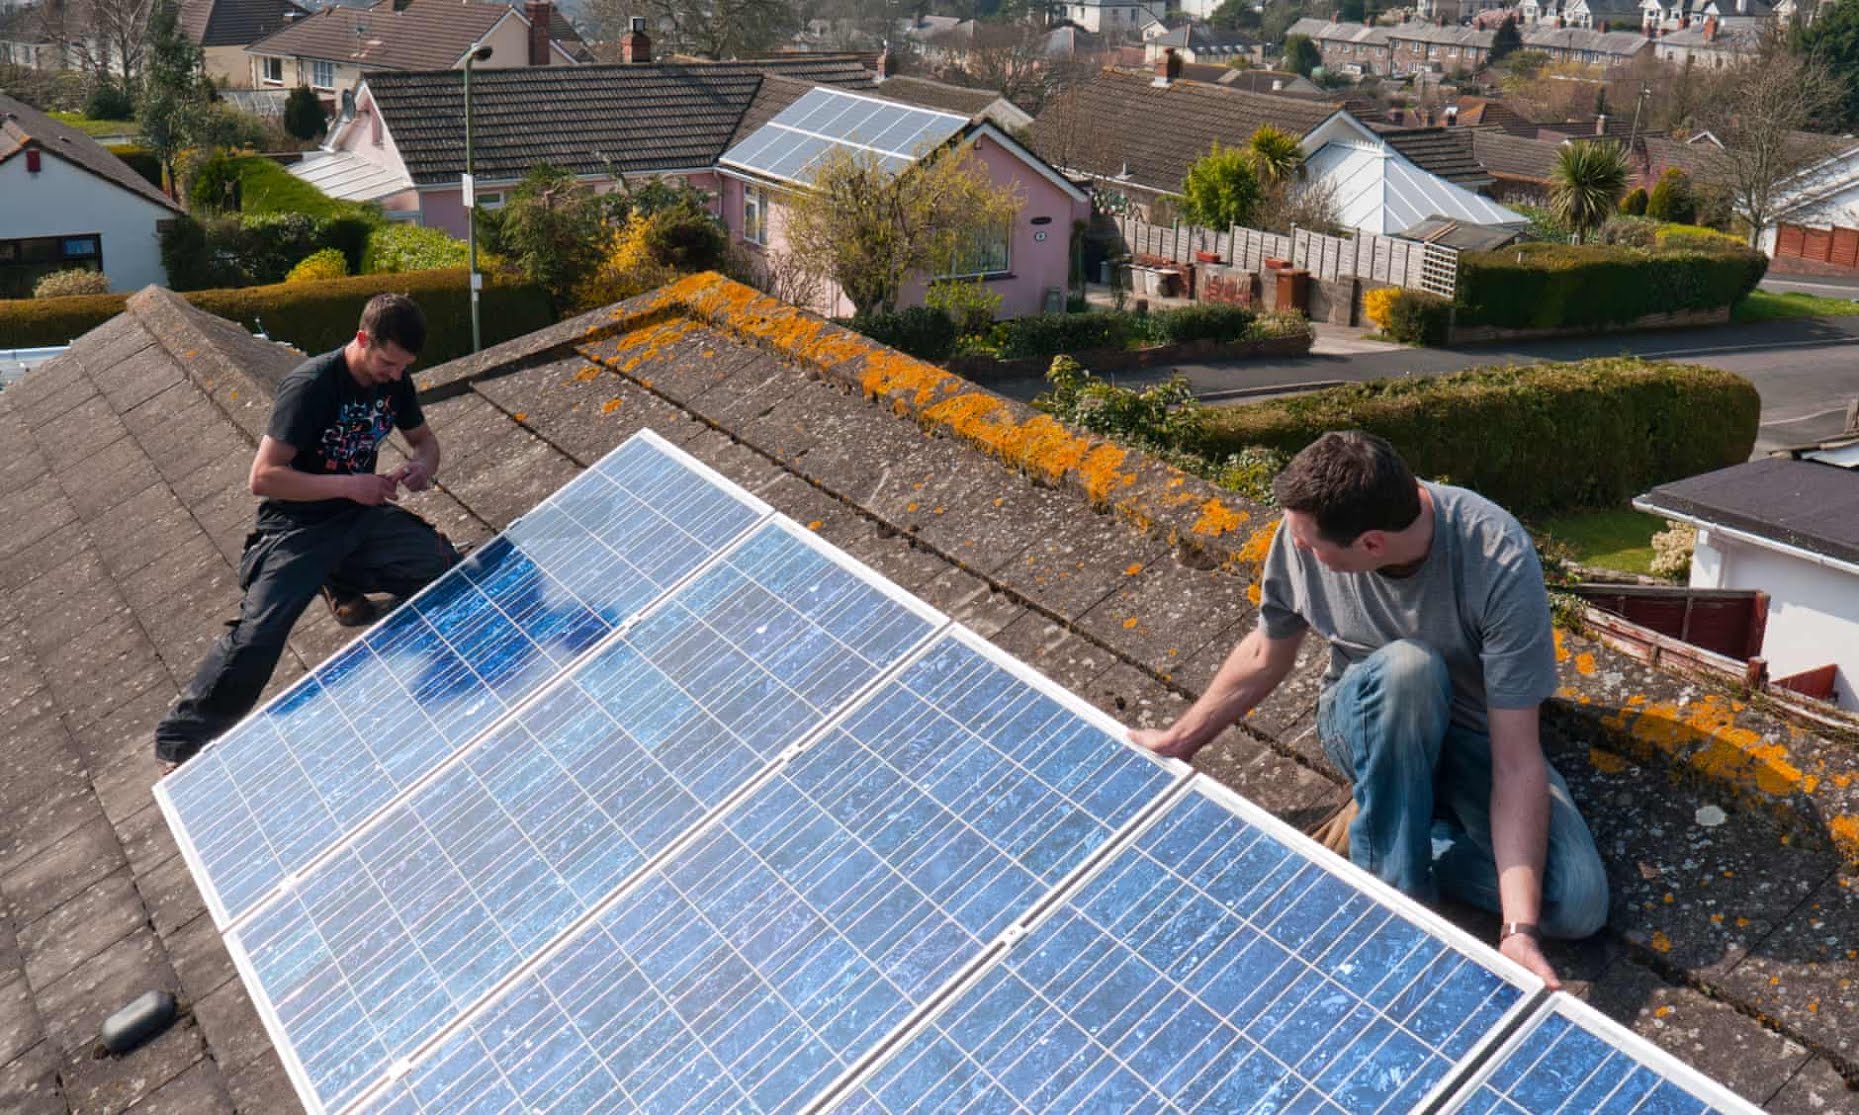 Weatherwatch: a bumper year for solar power, thanks to sunny spring and lockdowns